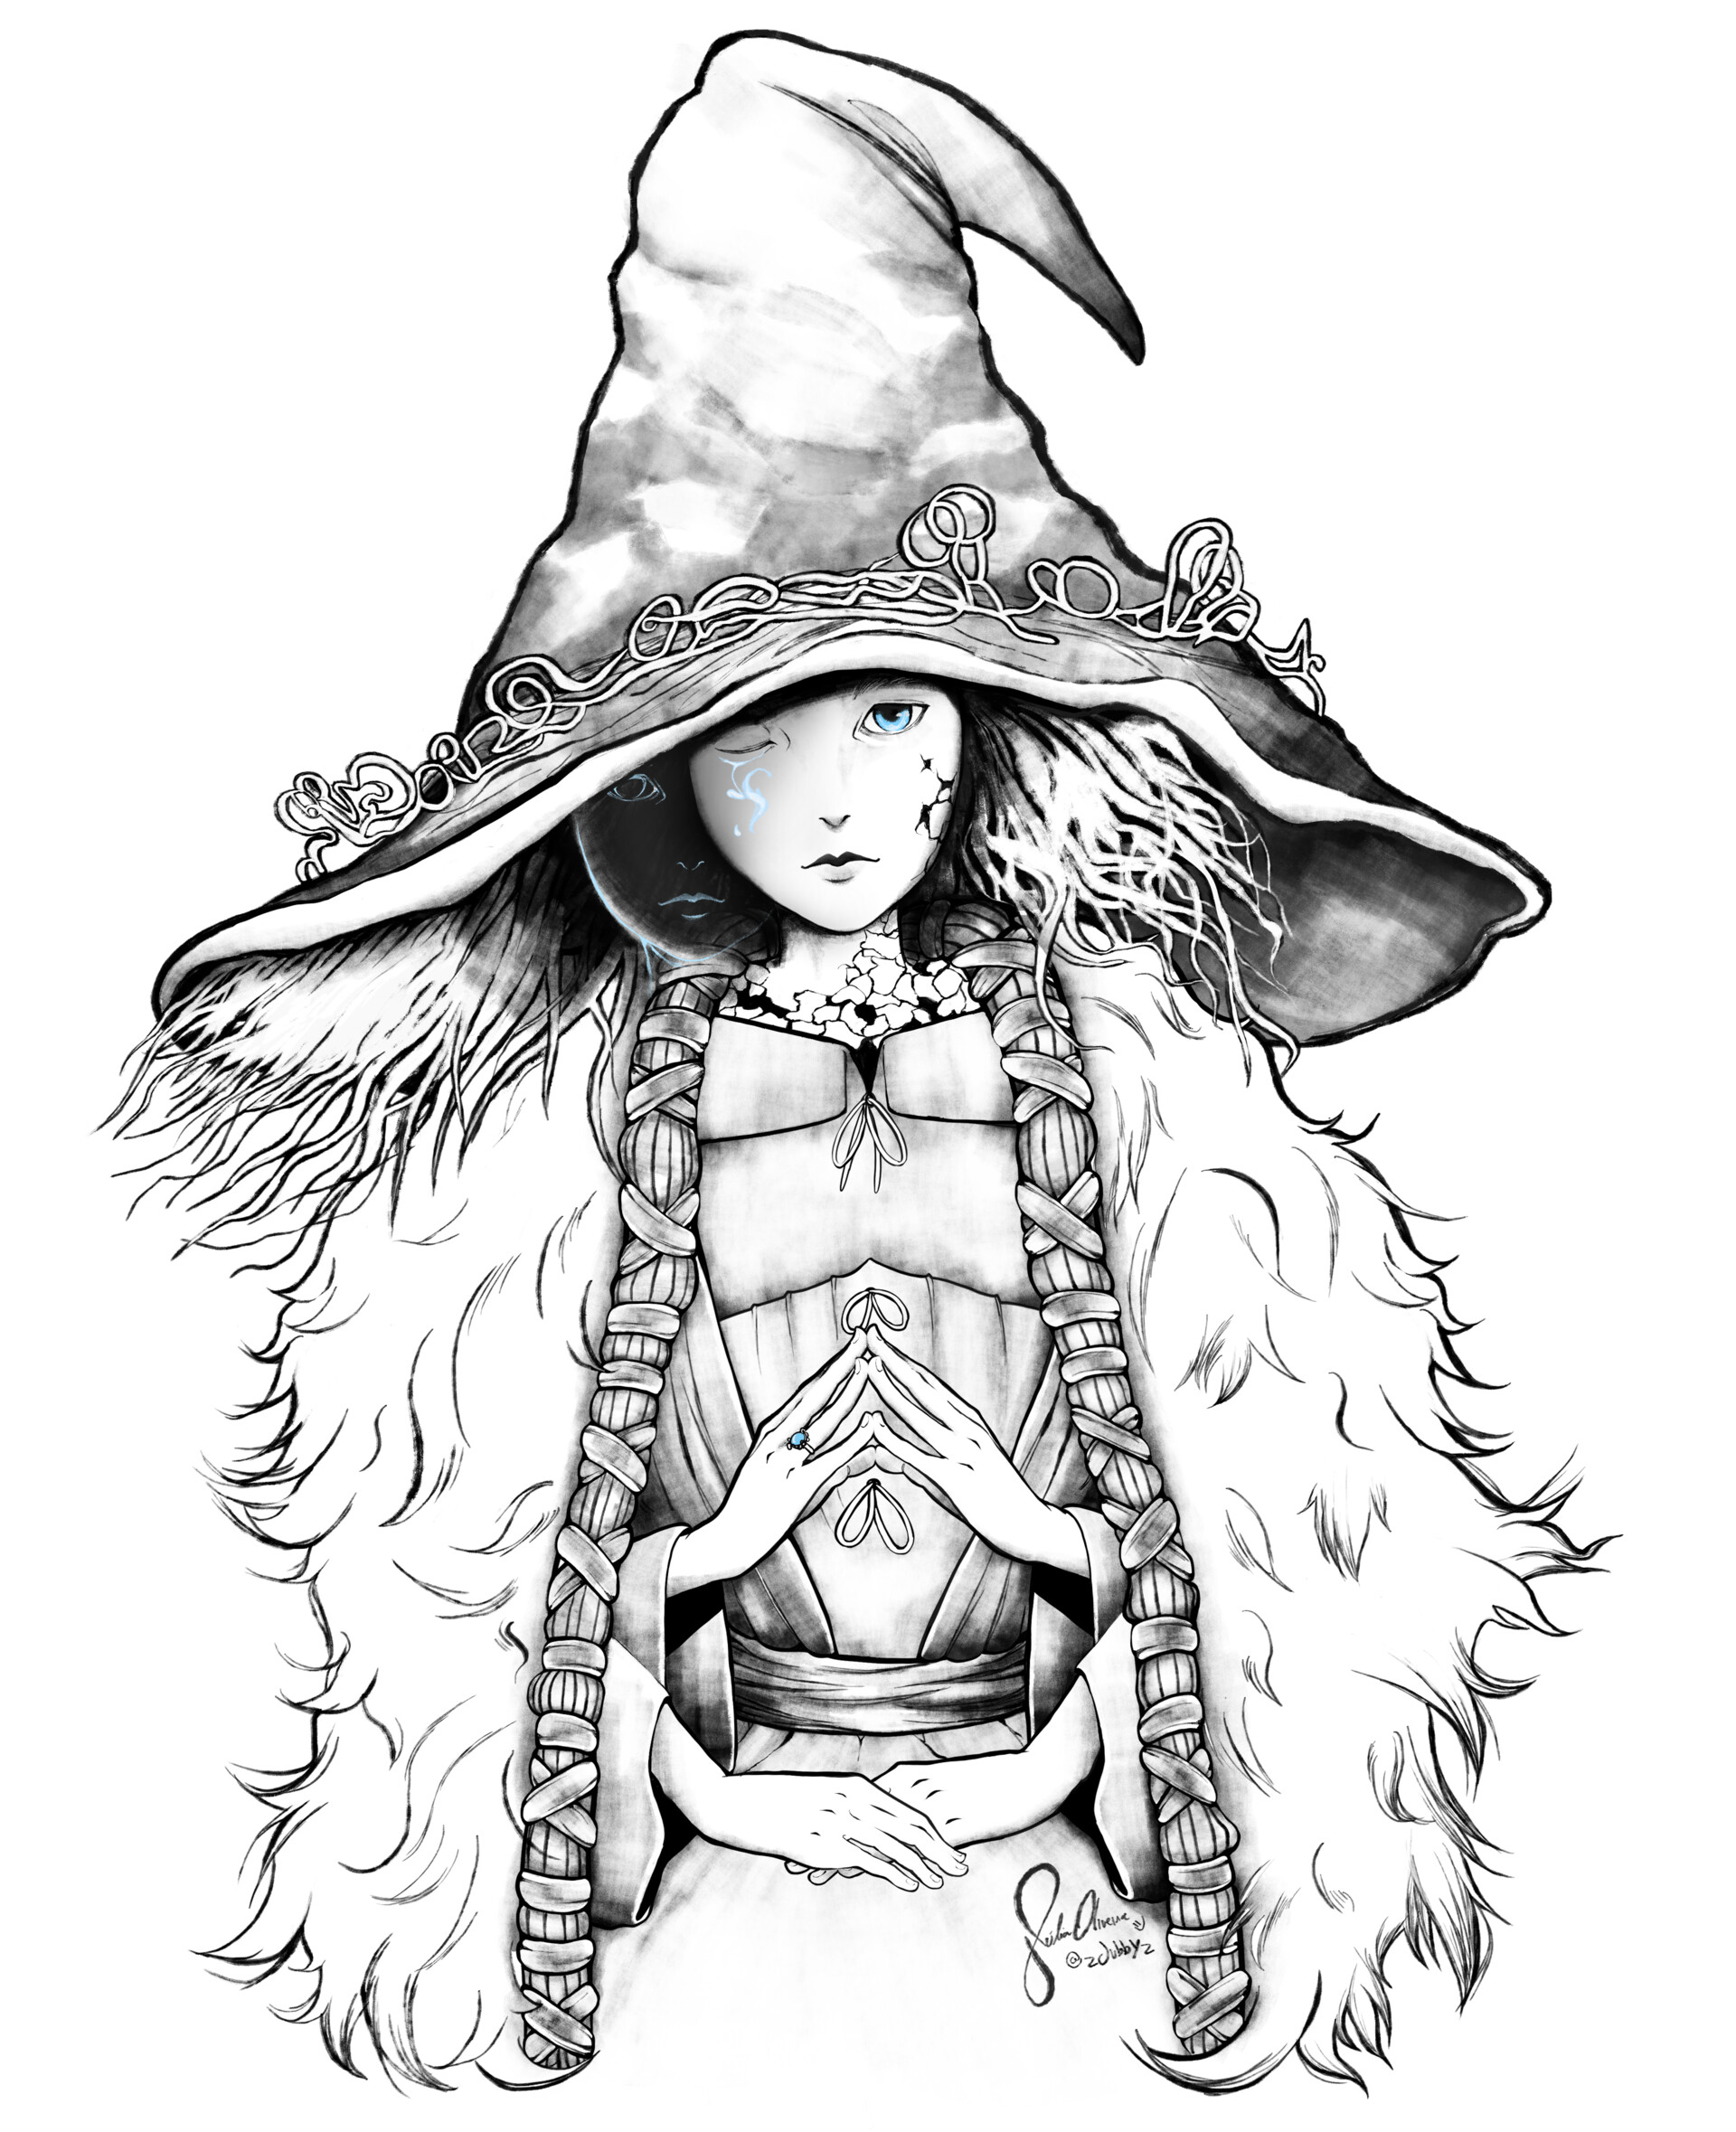 ranni the witch (elden ring) drawn by blackcat_enjia